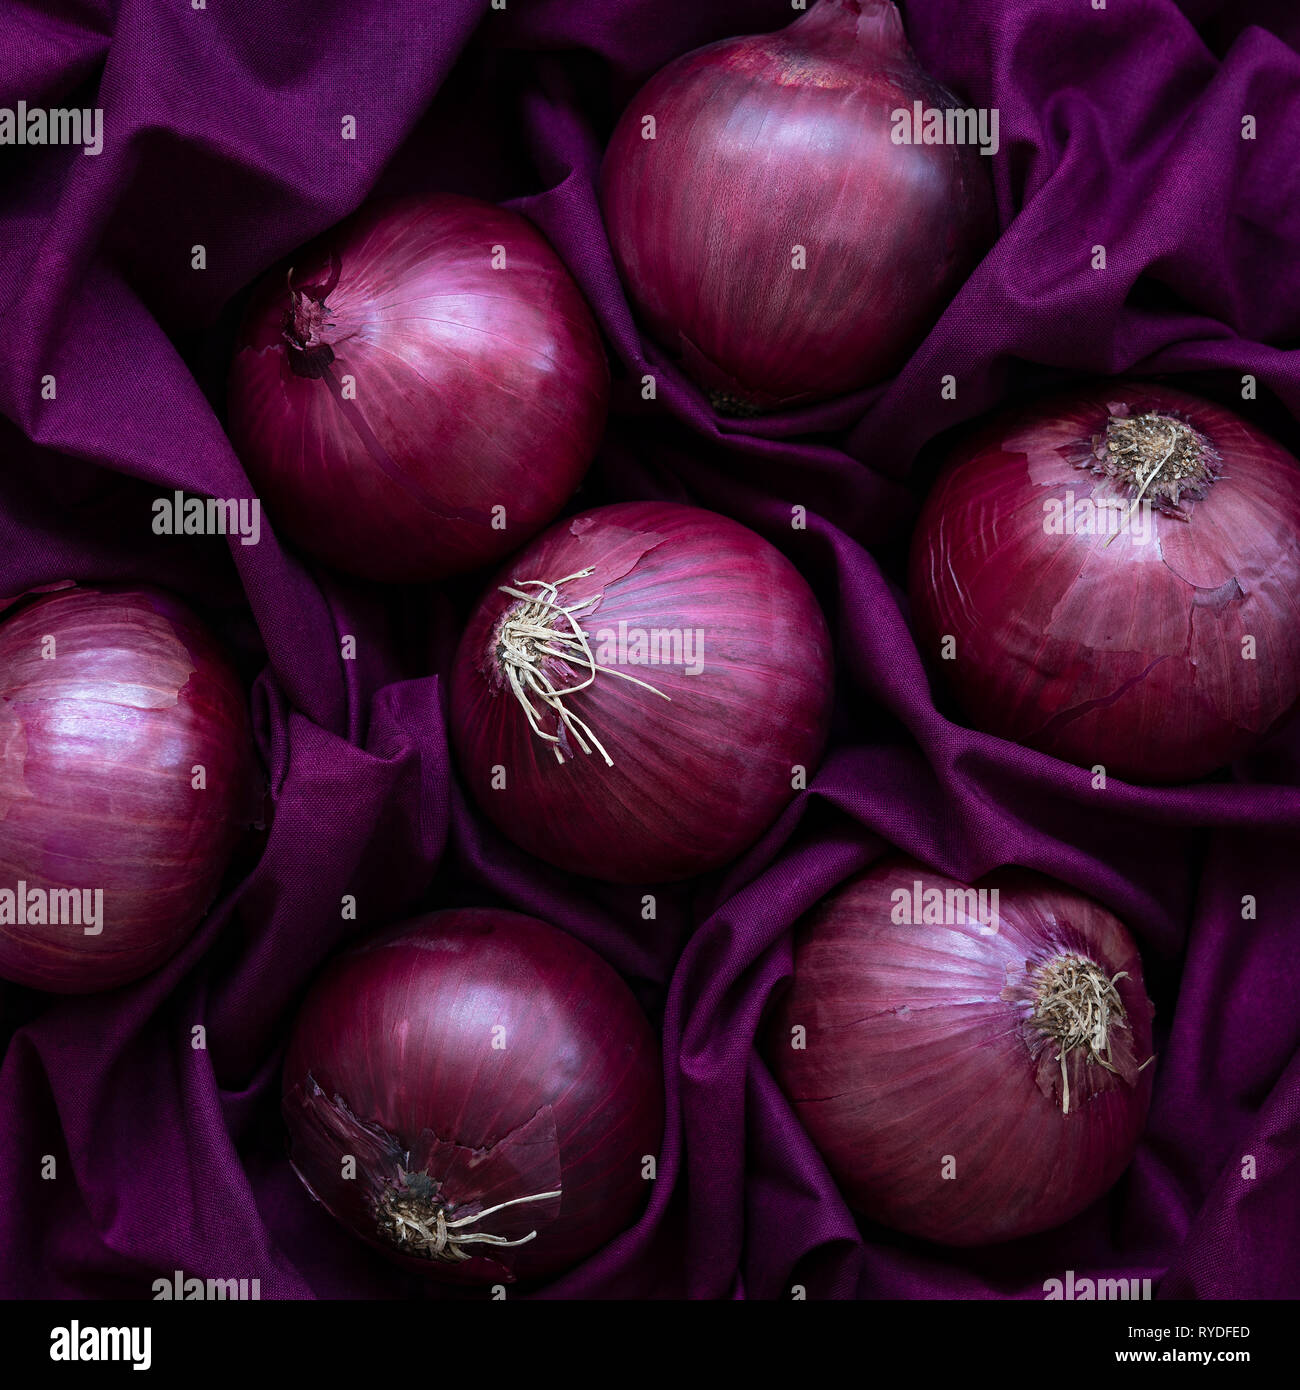 Fresh Red Onions on a purple background Stock Photo